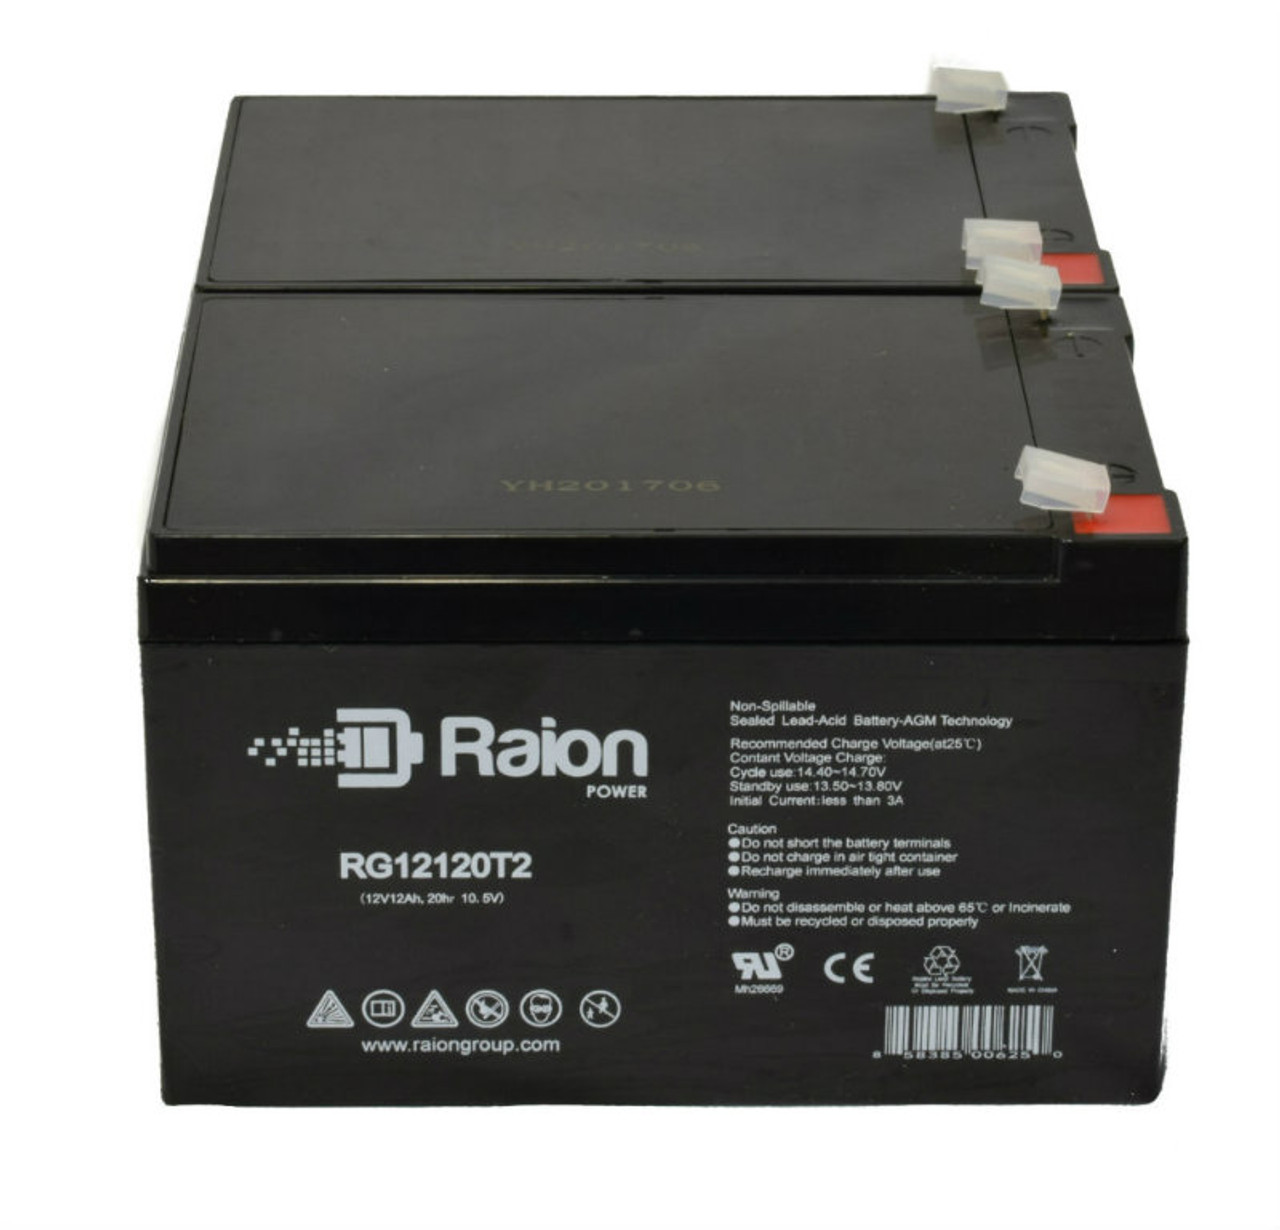 Raion Power RG12120T2 Replacement Battery Set for Bladez Mobility XTR 450 Mobility Scooter - 2 Pack